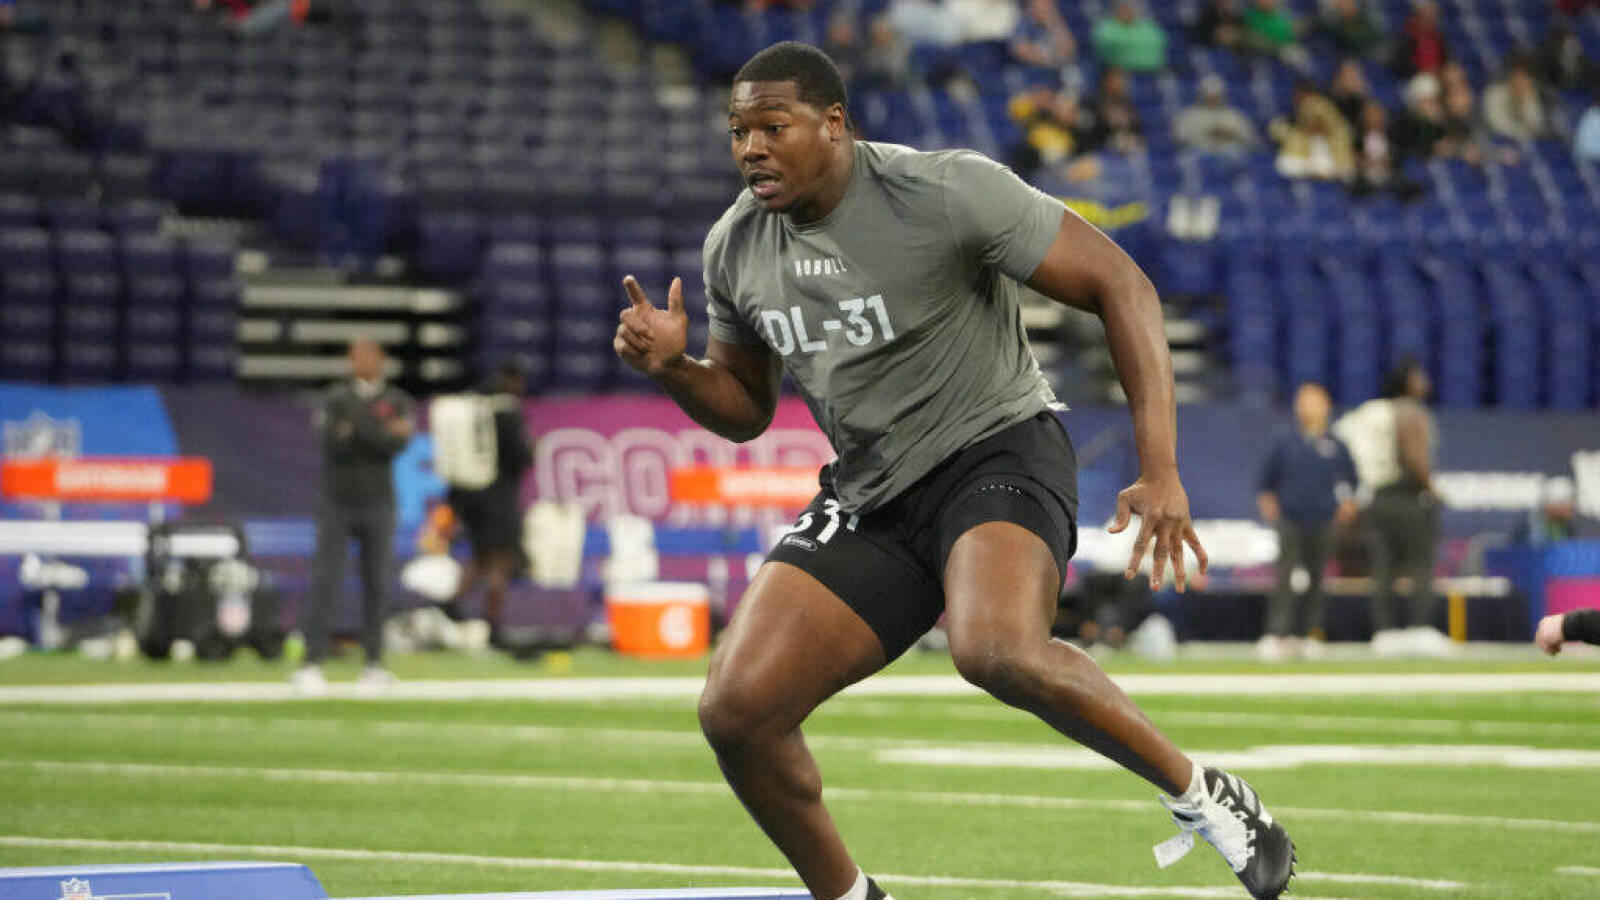 Myles Cole 2024 NFL Draft: Combine Results, Scouting Report For Jacksonville Jaguars EDGE